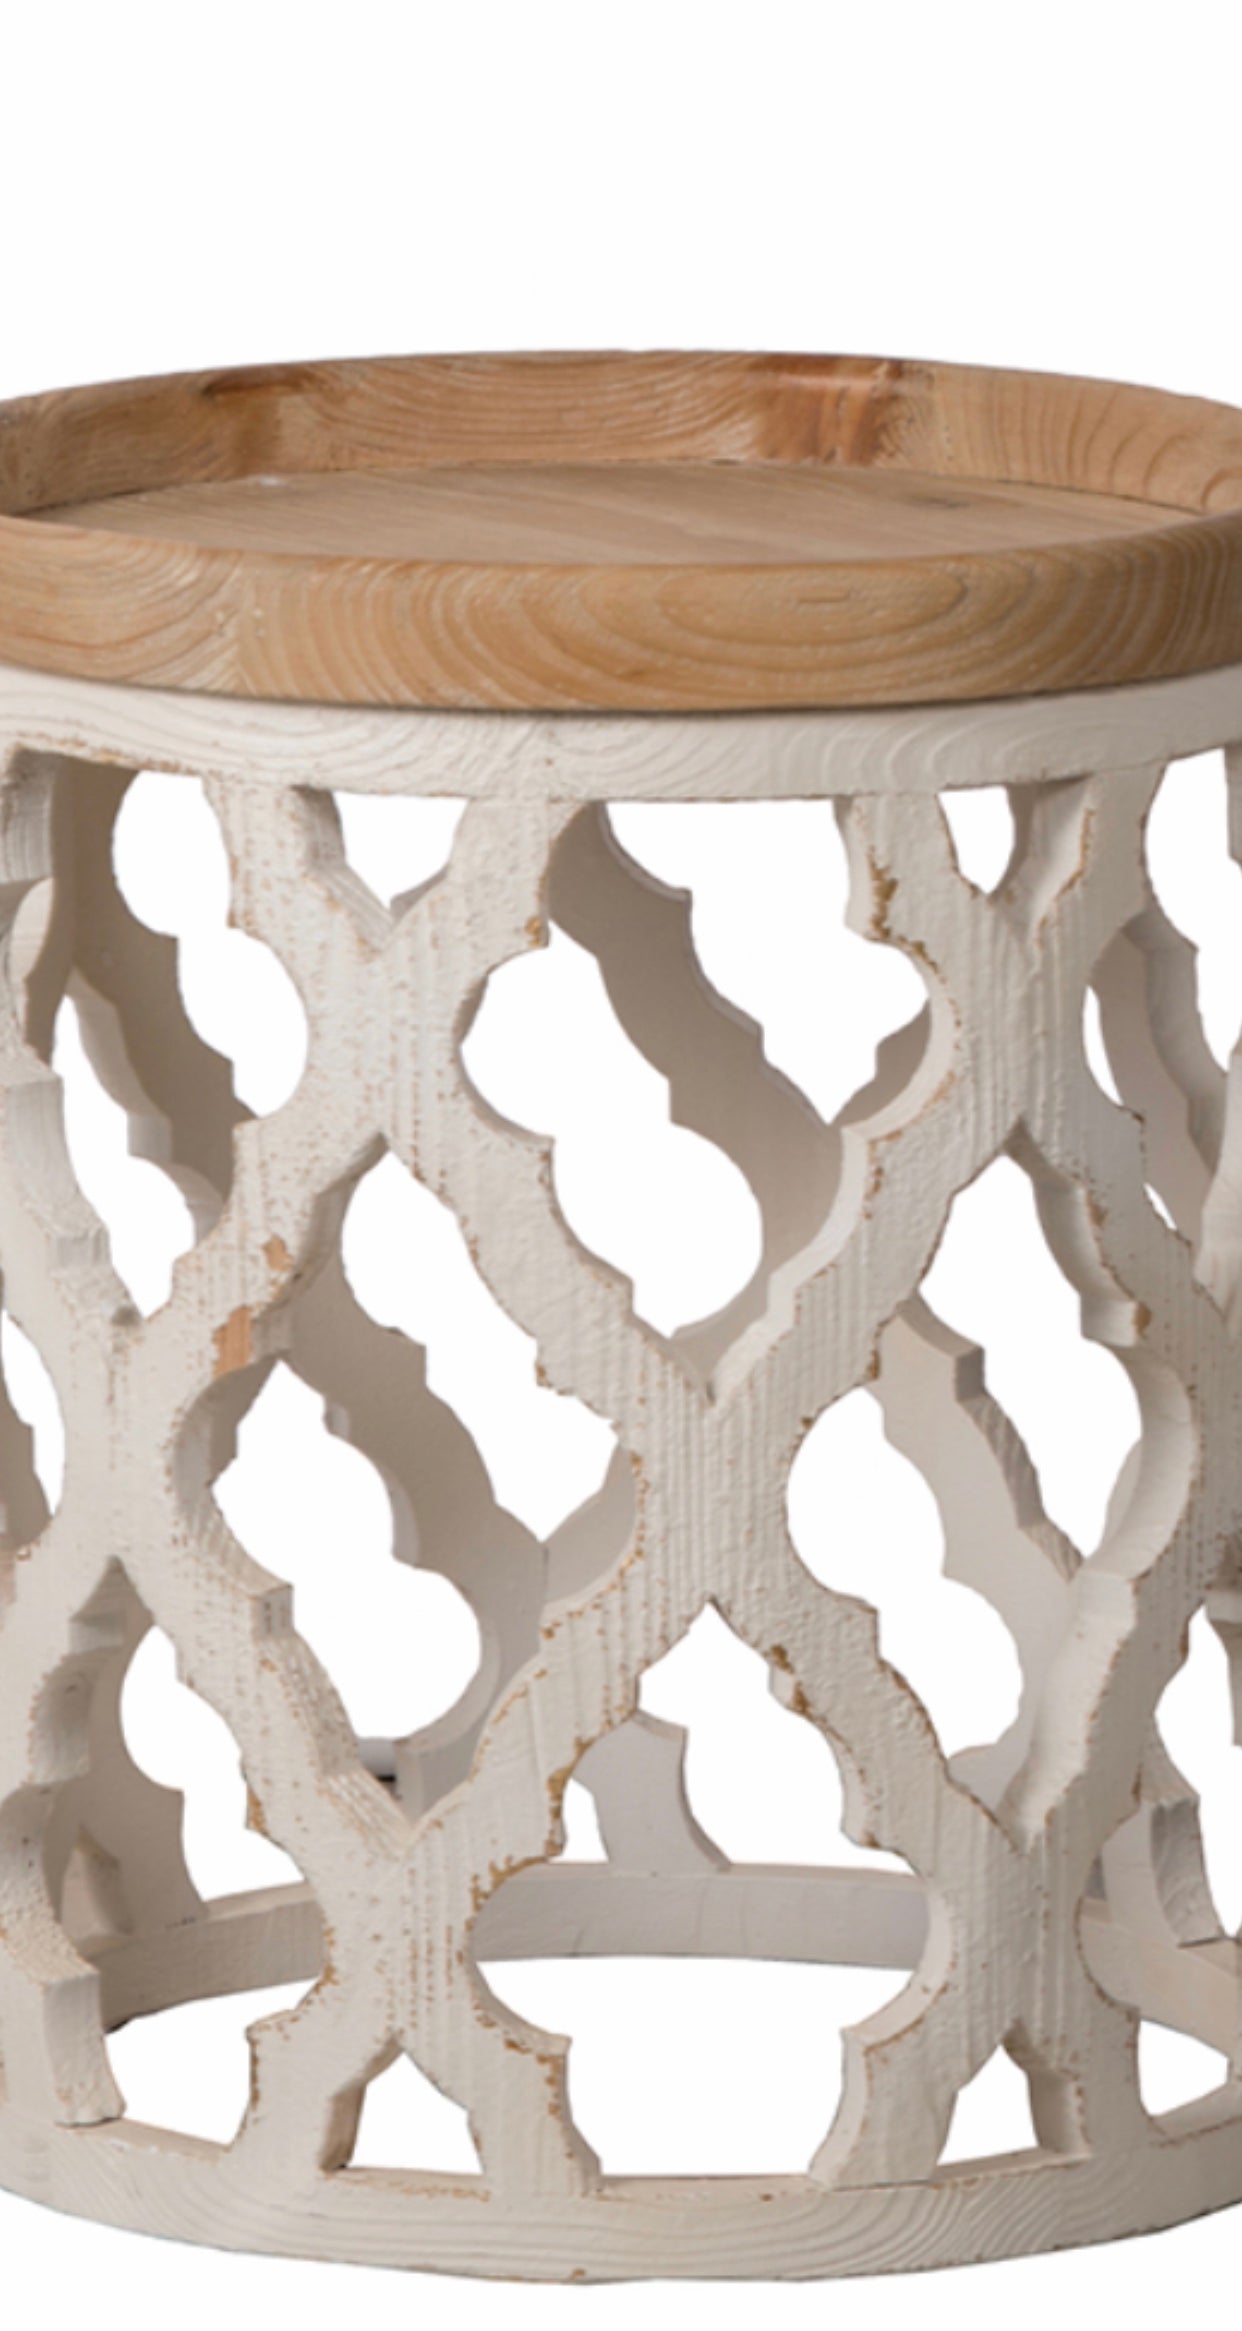 Side Table, Distressed White Wood Quatrefoil